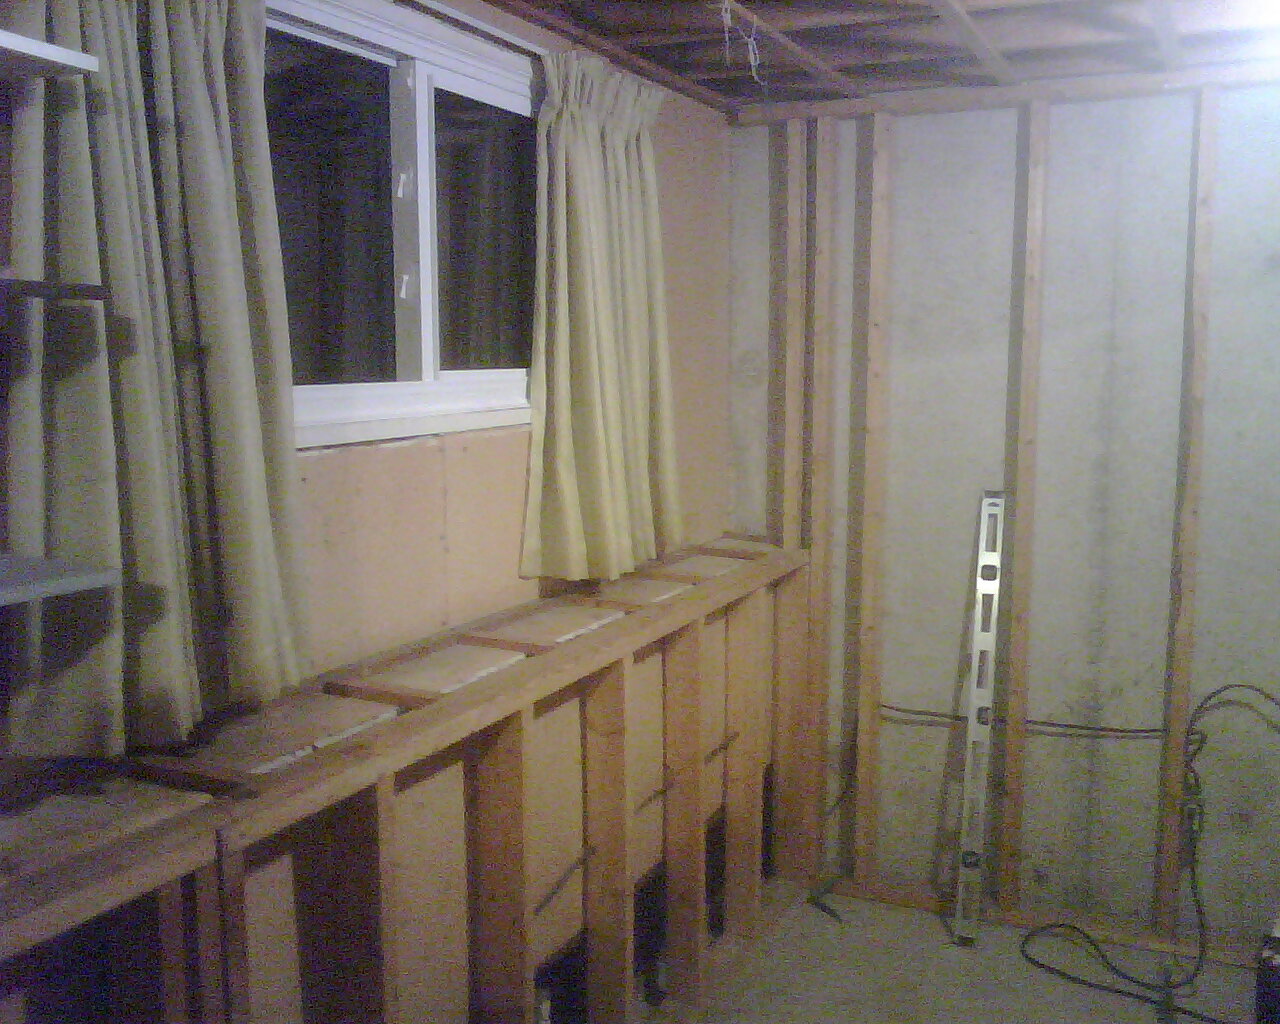 Basement room's front end as seen from the room's entrance